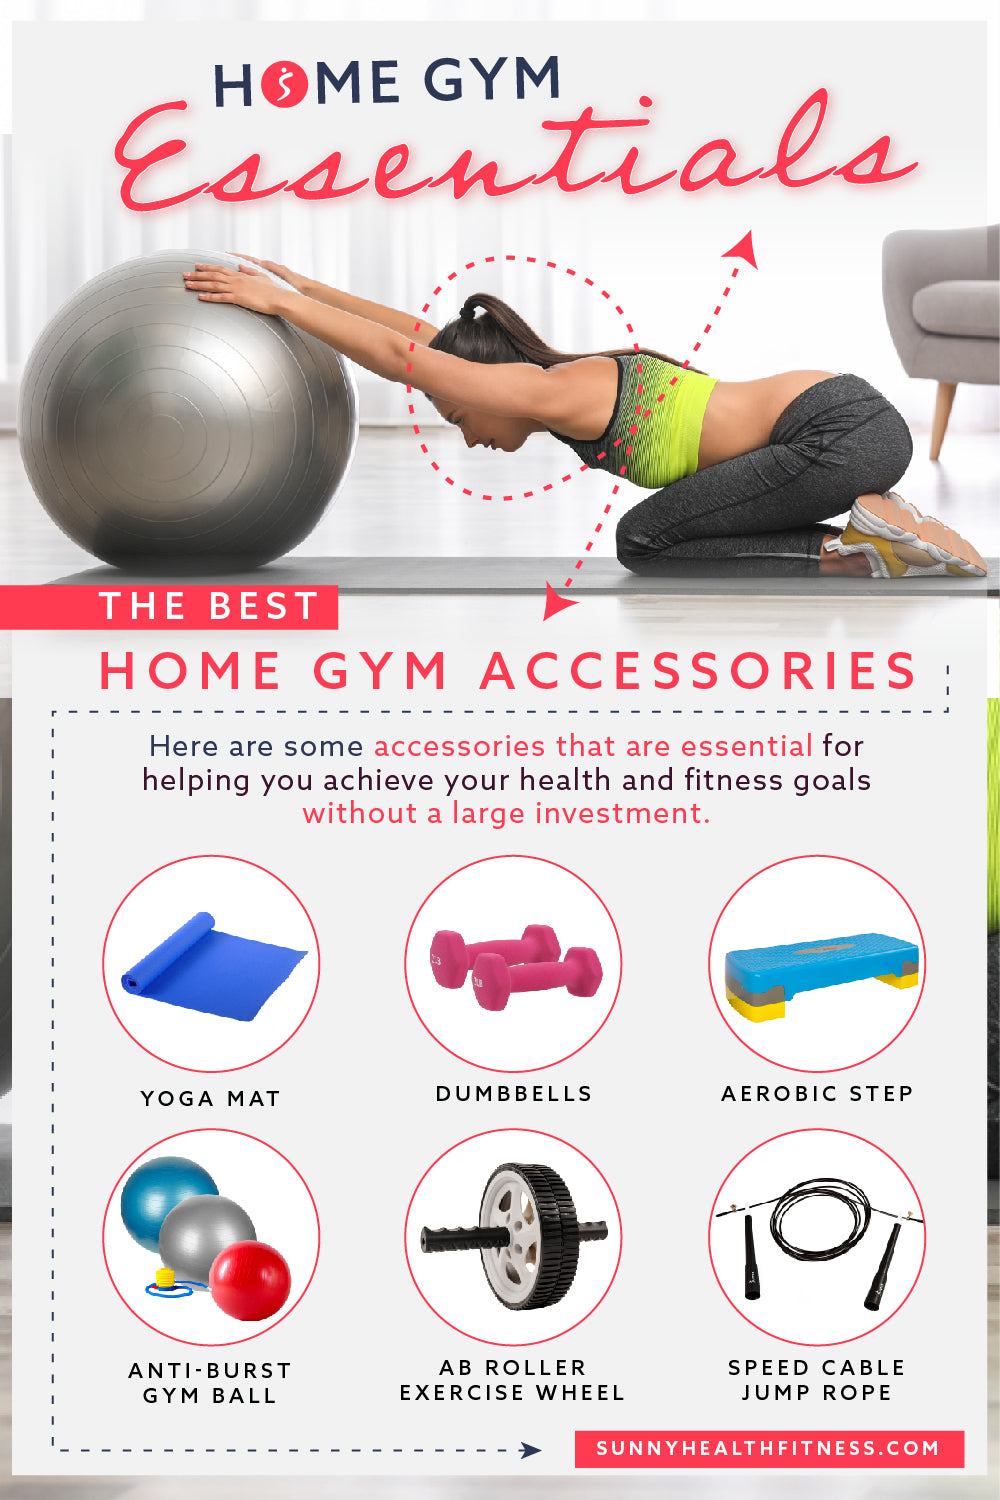 Home Gym Essentials: The Best Home Accessories